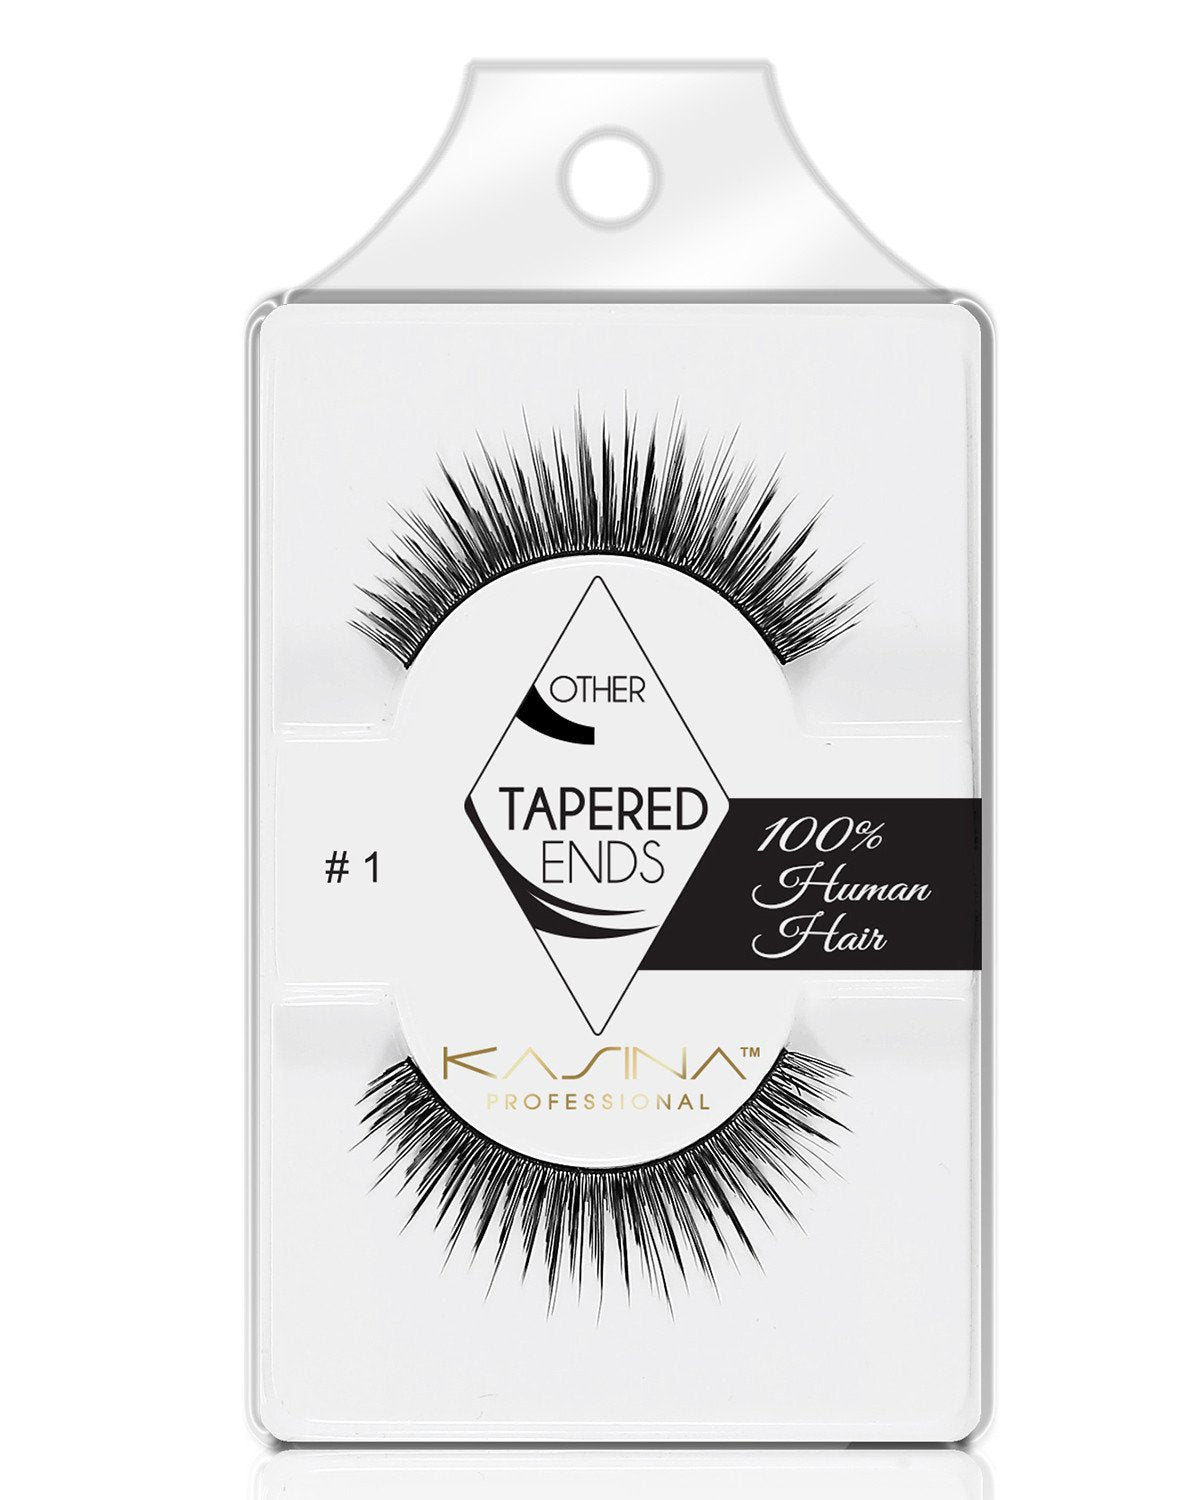 KASINA EYELASHES Professional Band Lashes - "Natural-Glamour" Style  Handmade from 100% Human Hair - for Natural Look and Feel   Tapered Ends - for Seamless Blending with your Natural lashes 